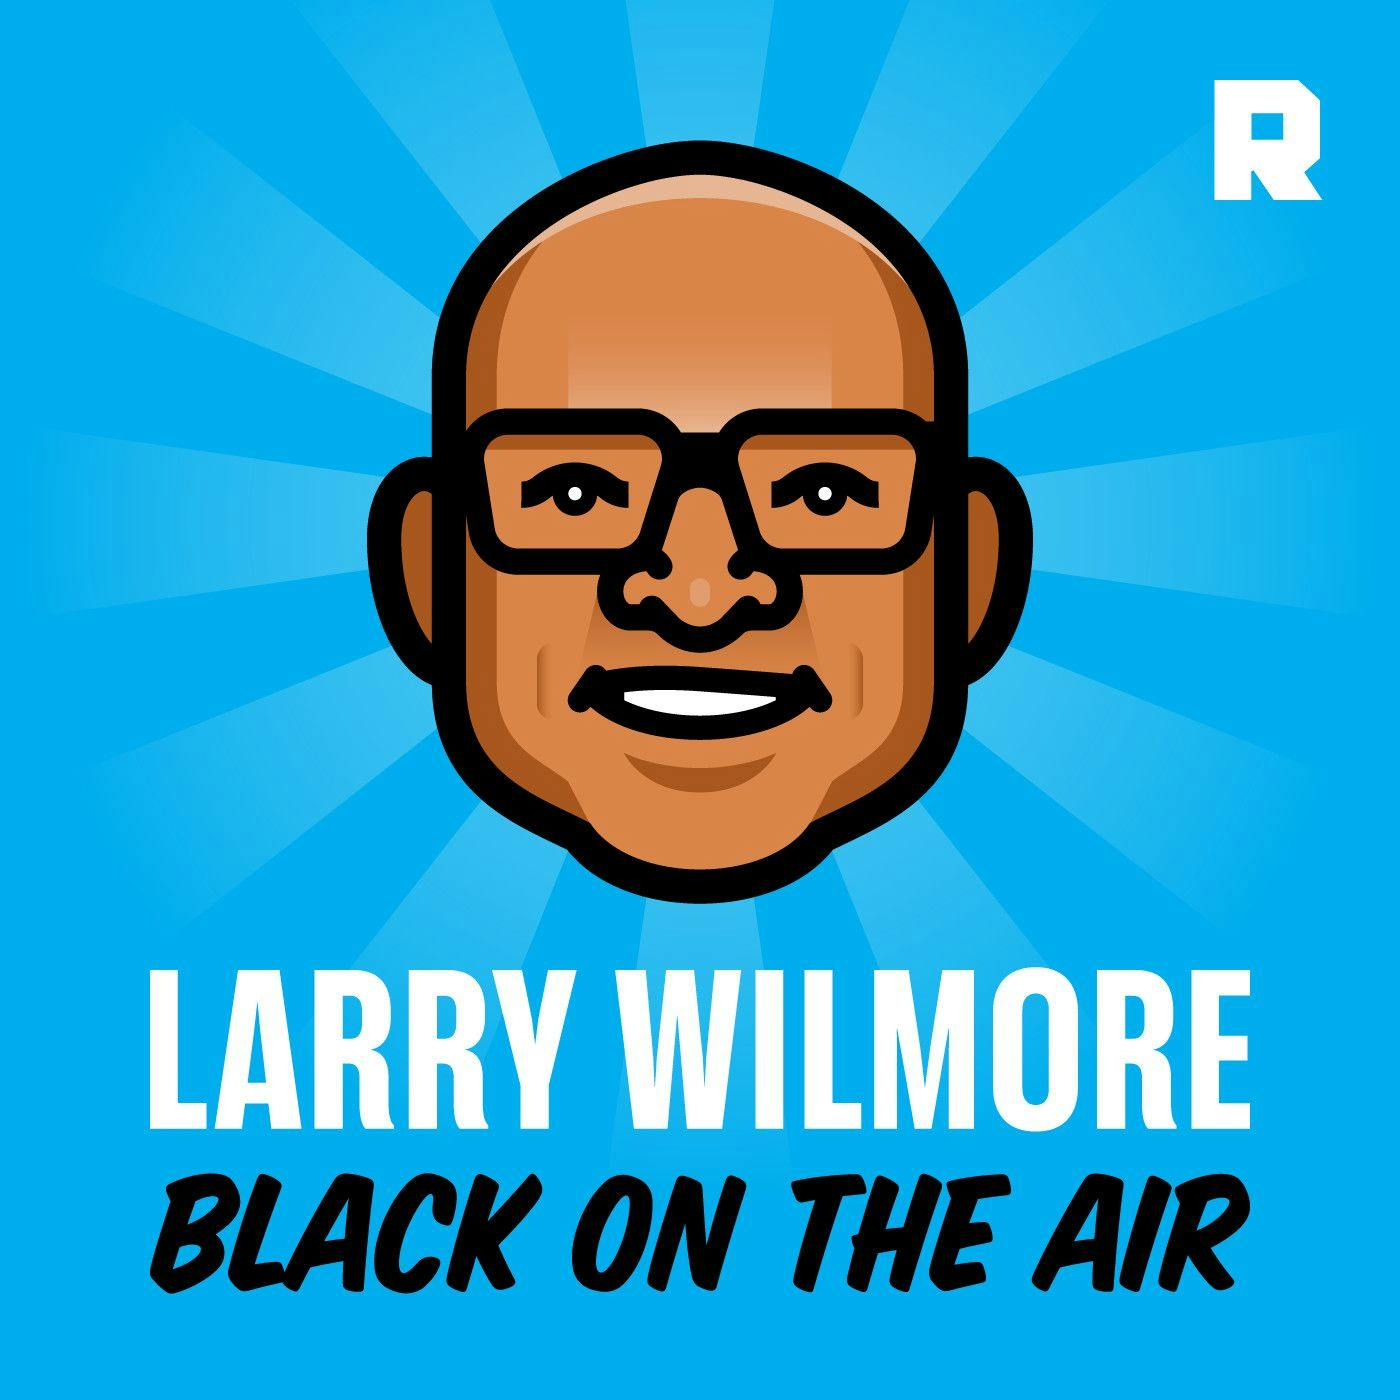 Wrapping up 2018 With Tommy Alter | Larry Wilmore: Black on the Air (Ep. 56)